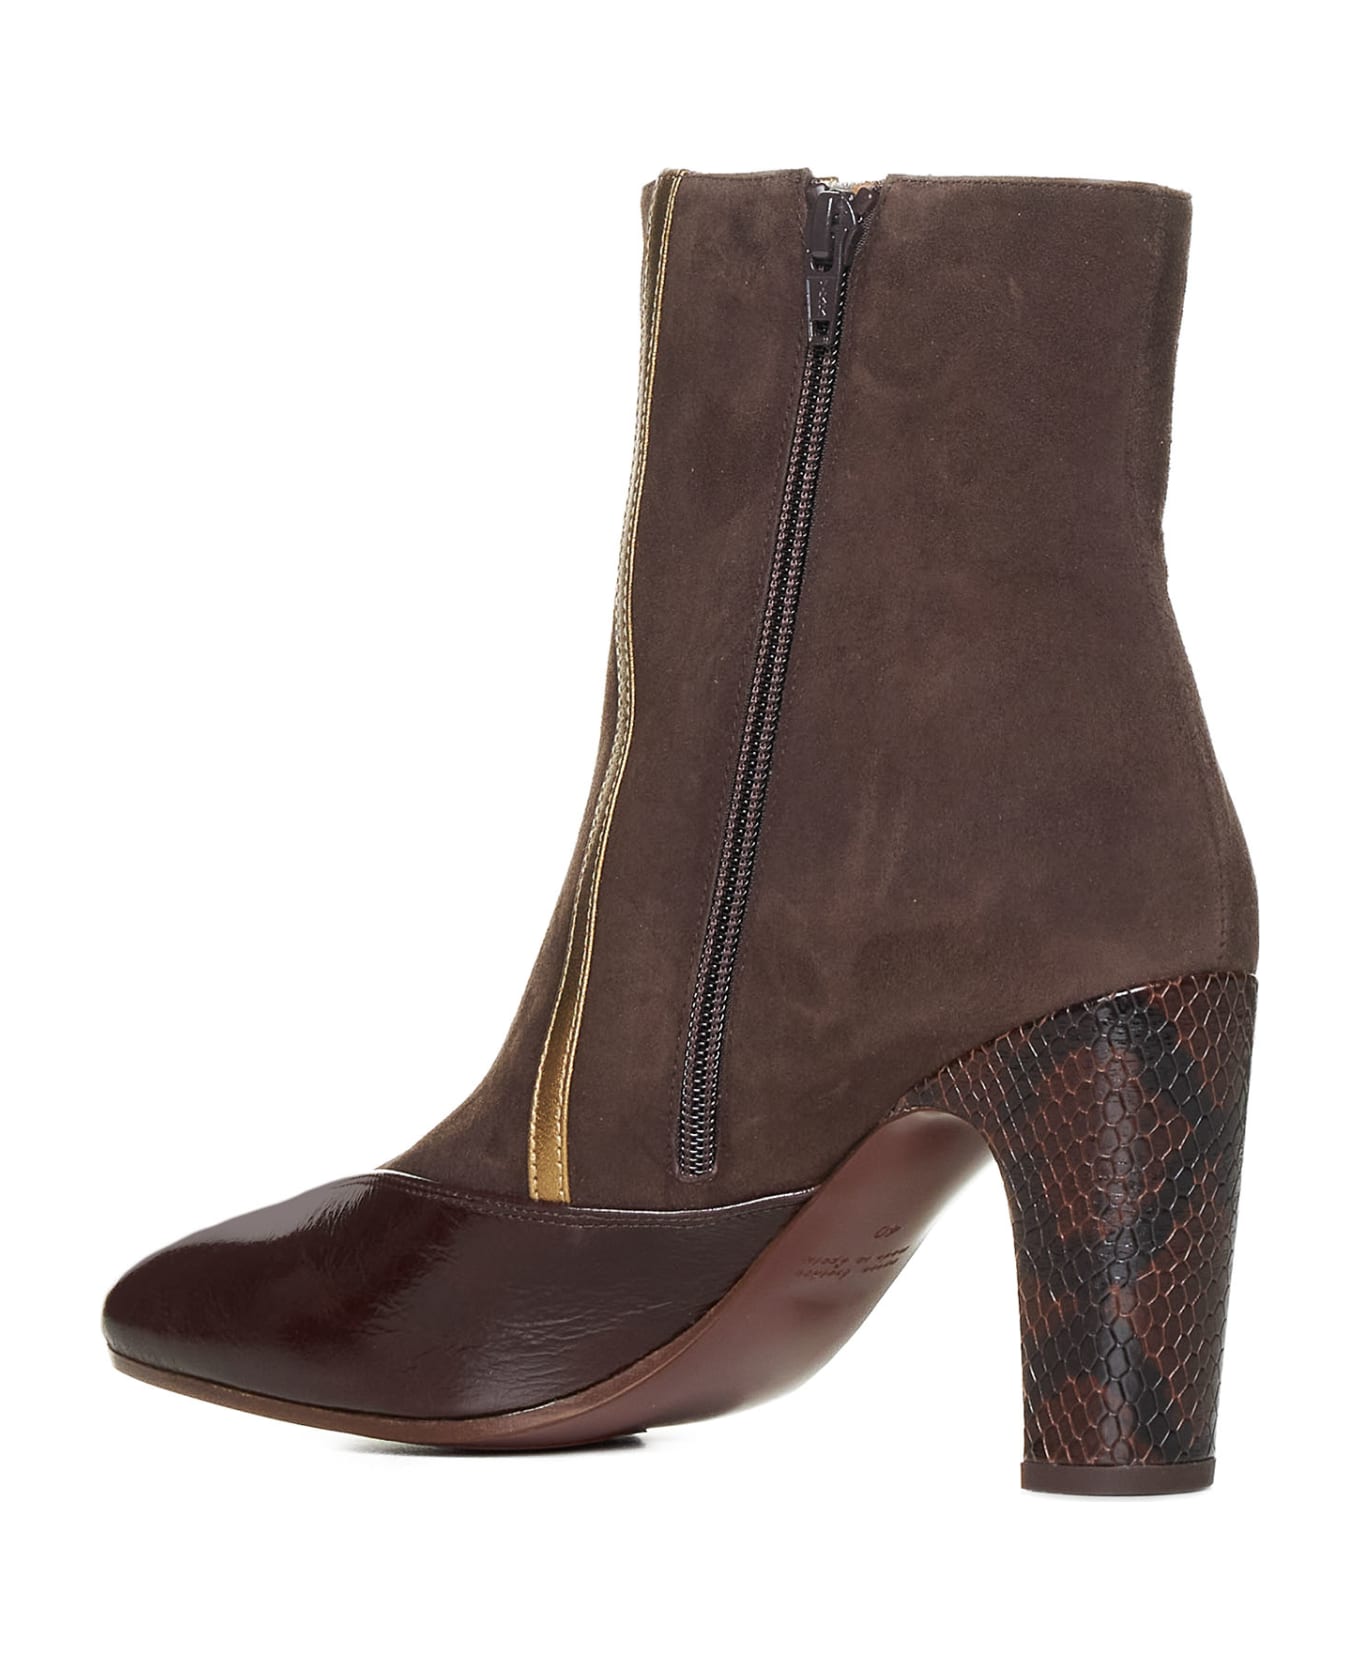 Chie Mihara Boots - Testa bronce